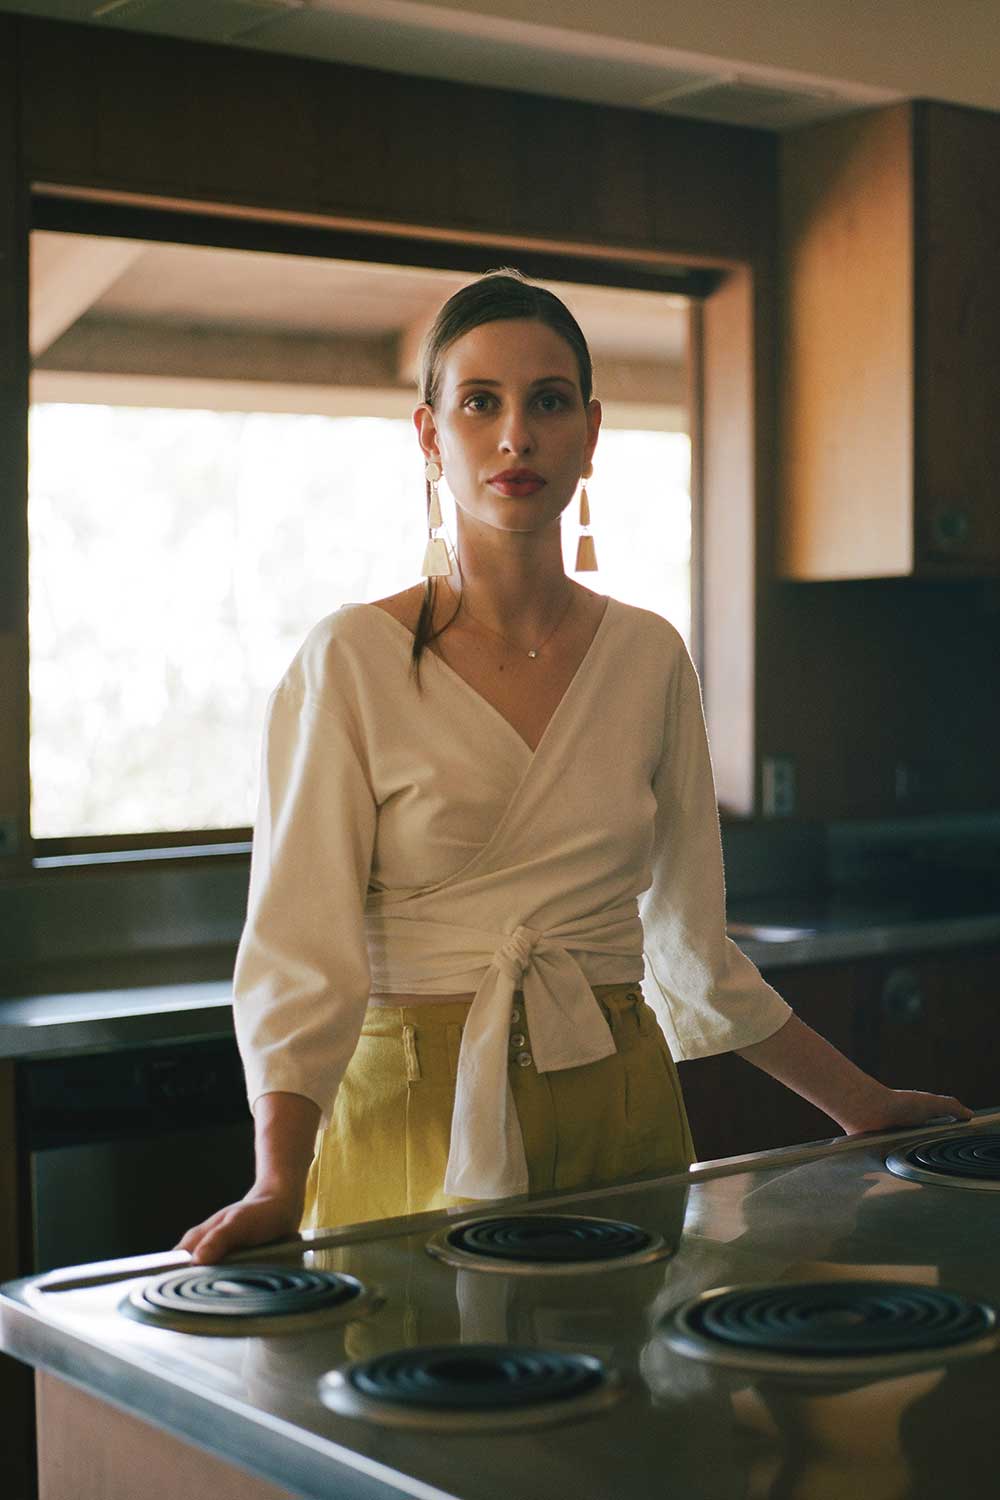 Woman in white top in kitchen